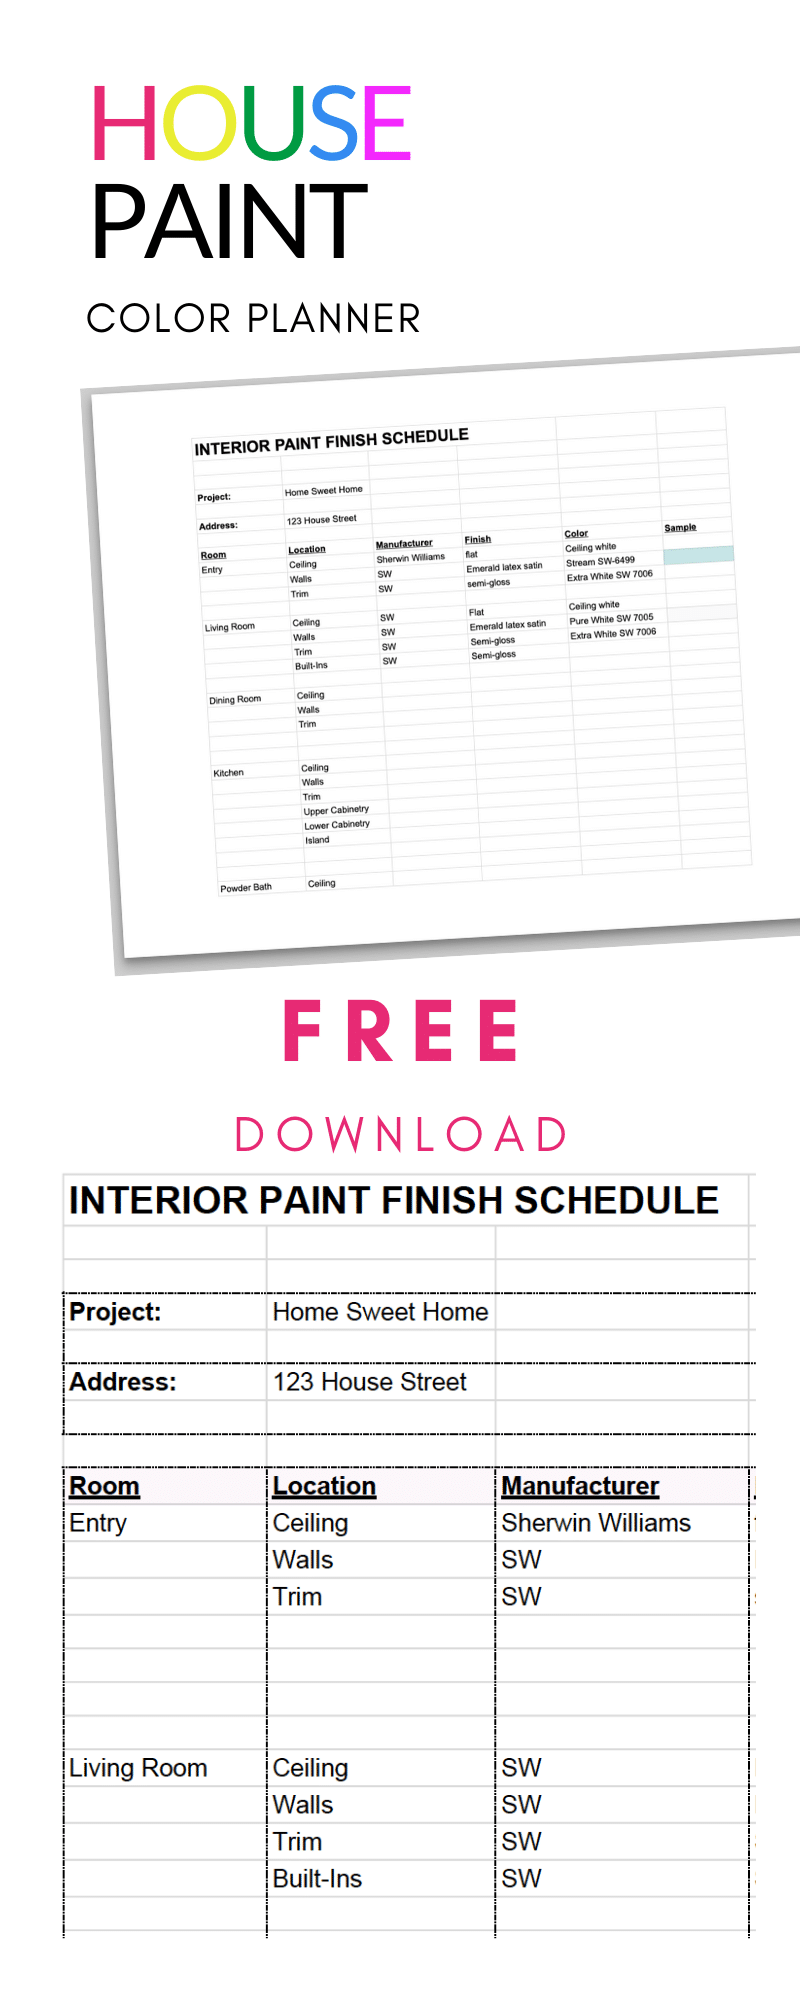 How to Use an Interior Paint Finish Schedule + FREE HOUSE PAINT COLOR TRACKER